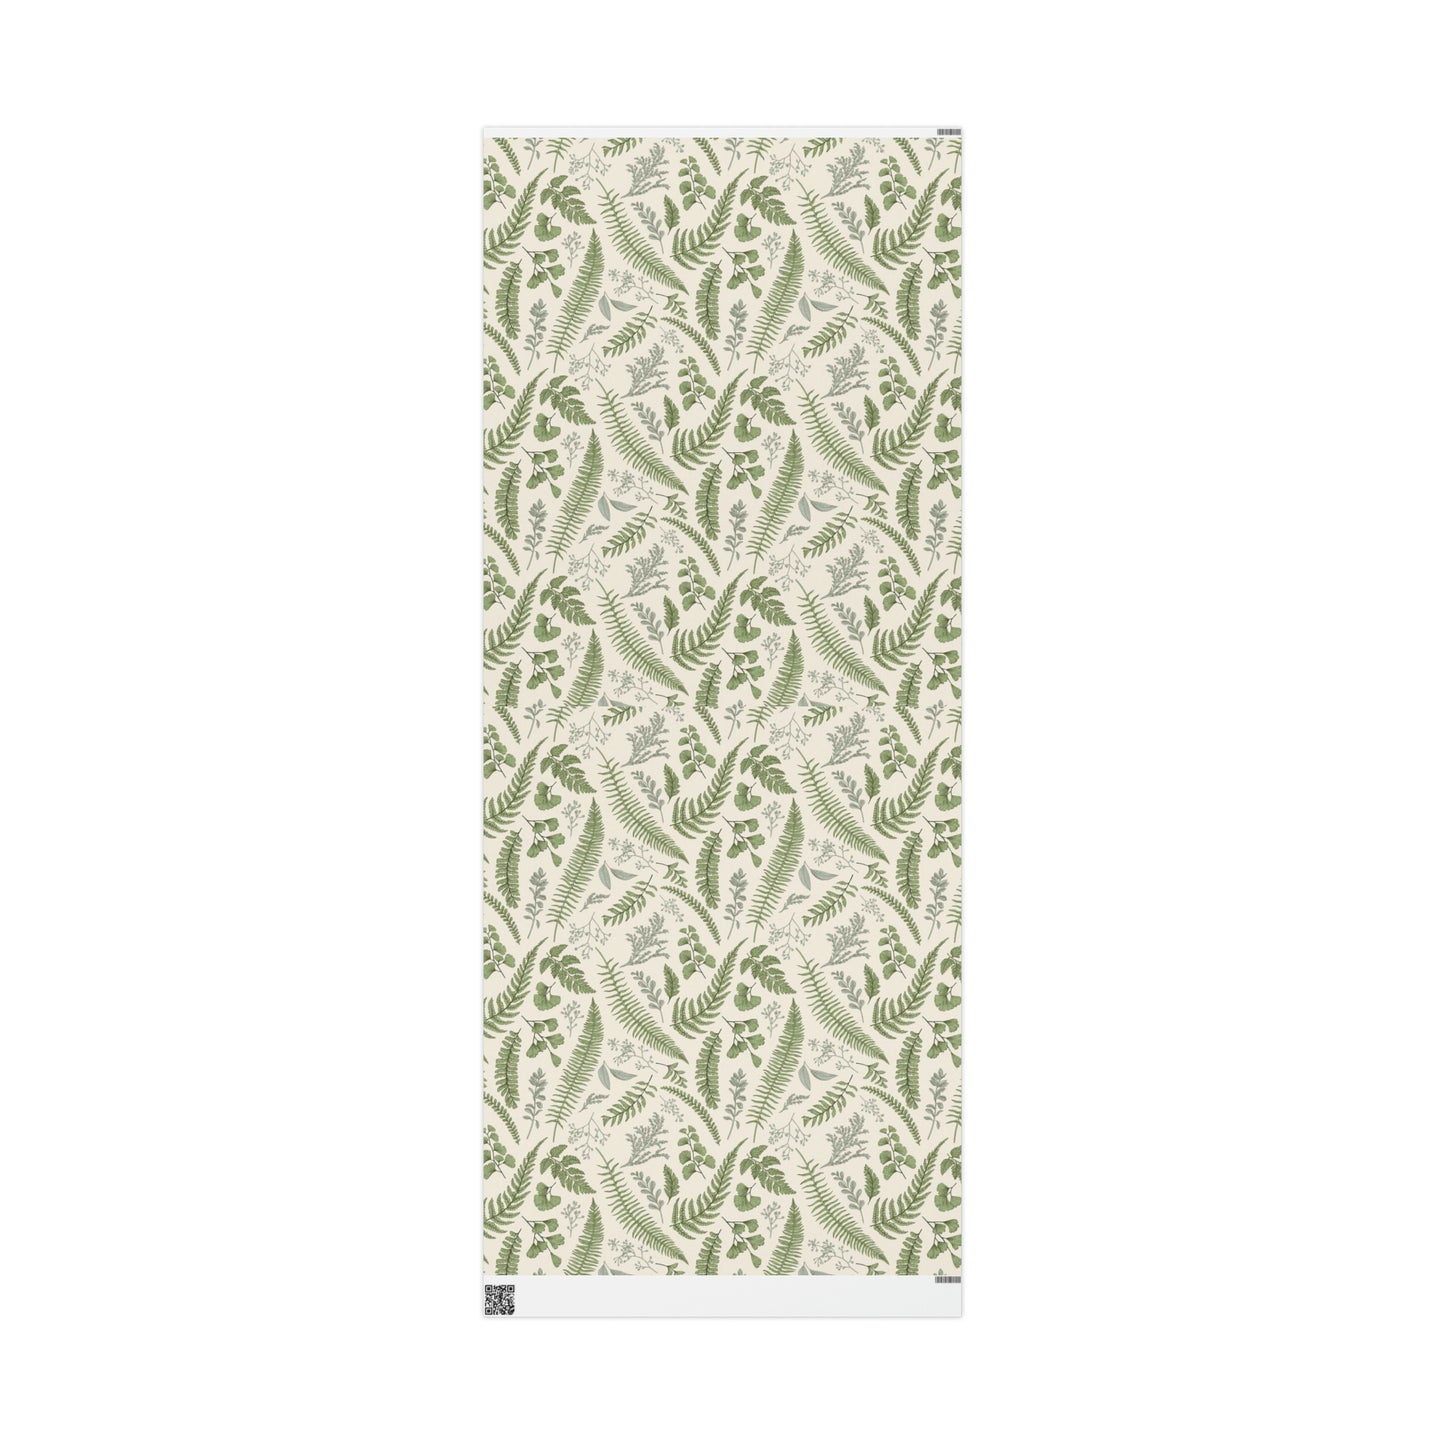 Lovely Botanical Leaves Ferns Gift Wrap - Botanical Wrapping Paper